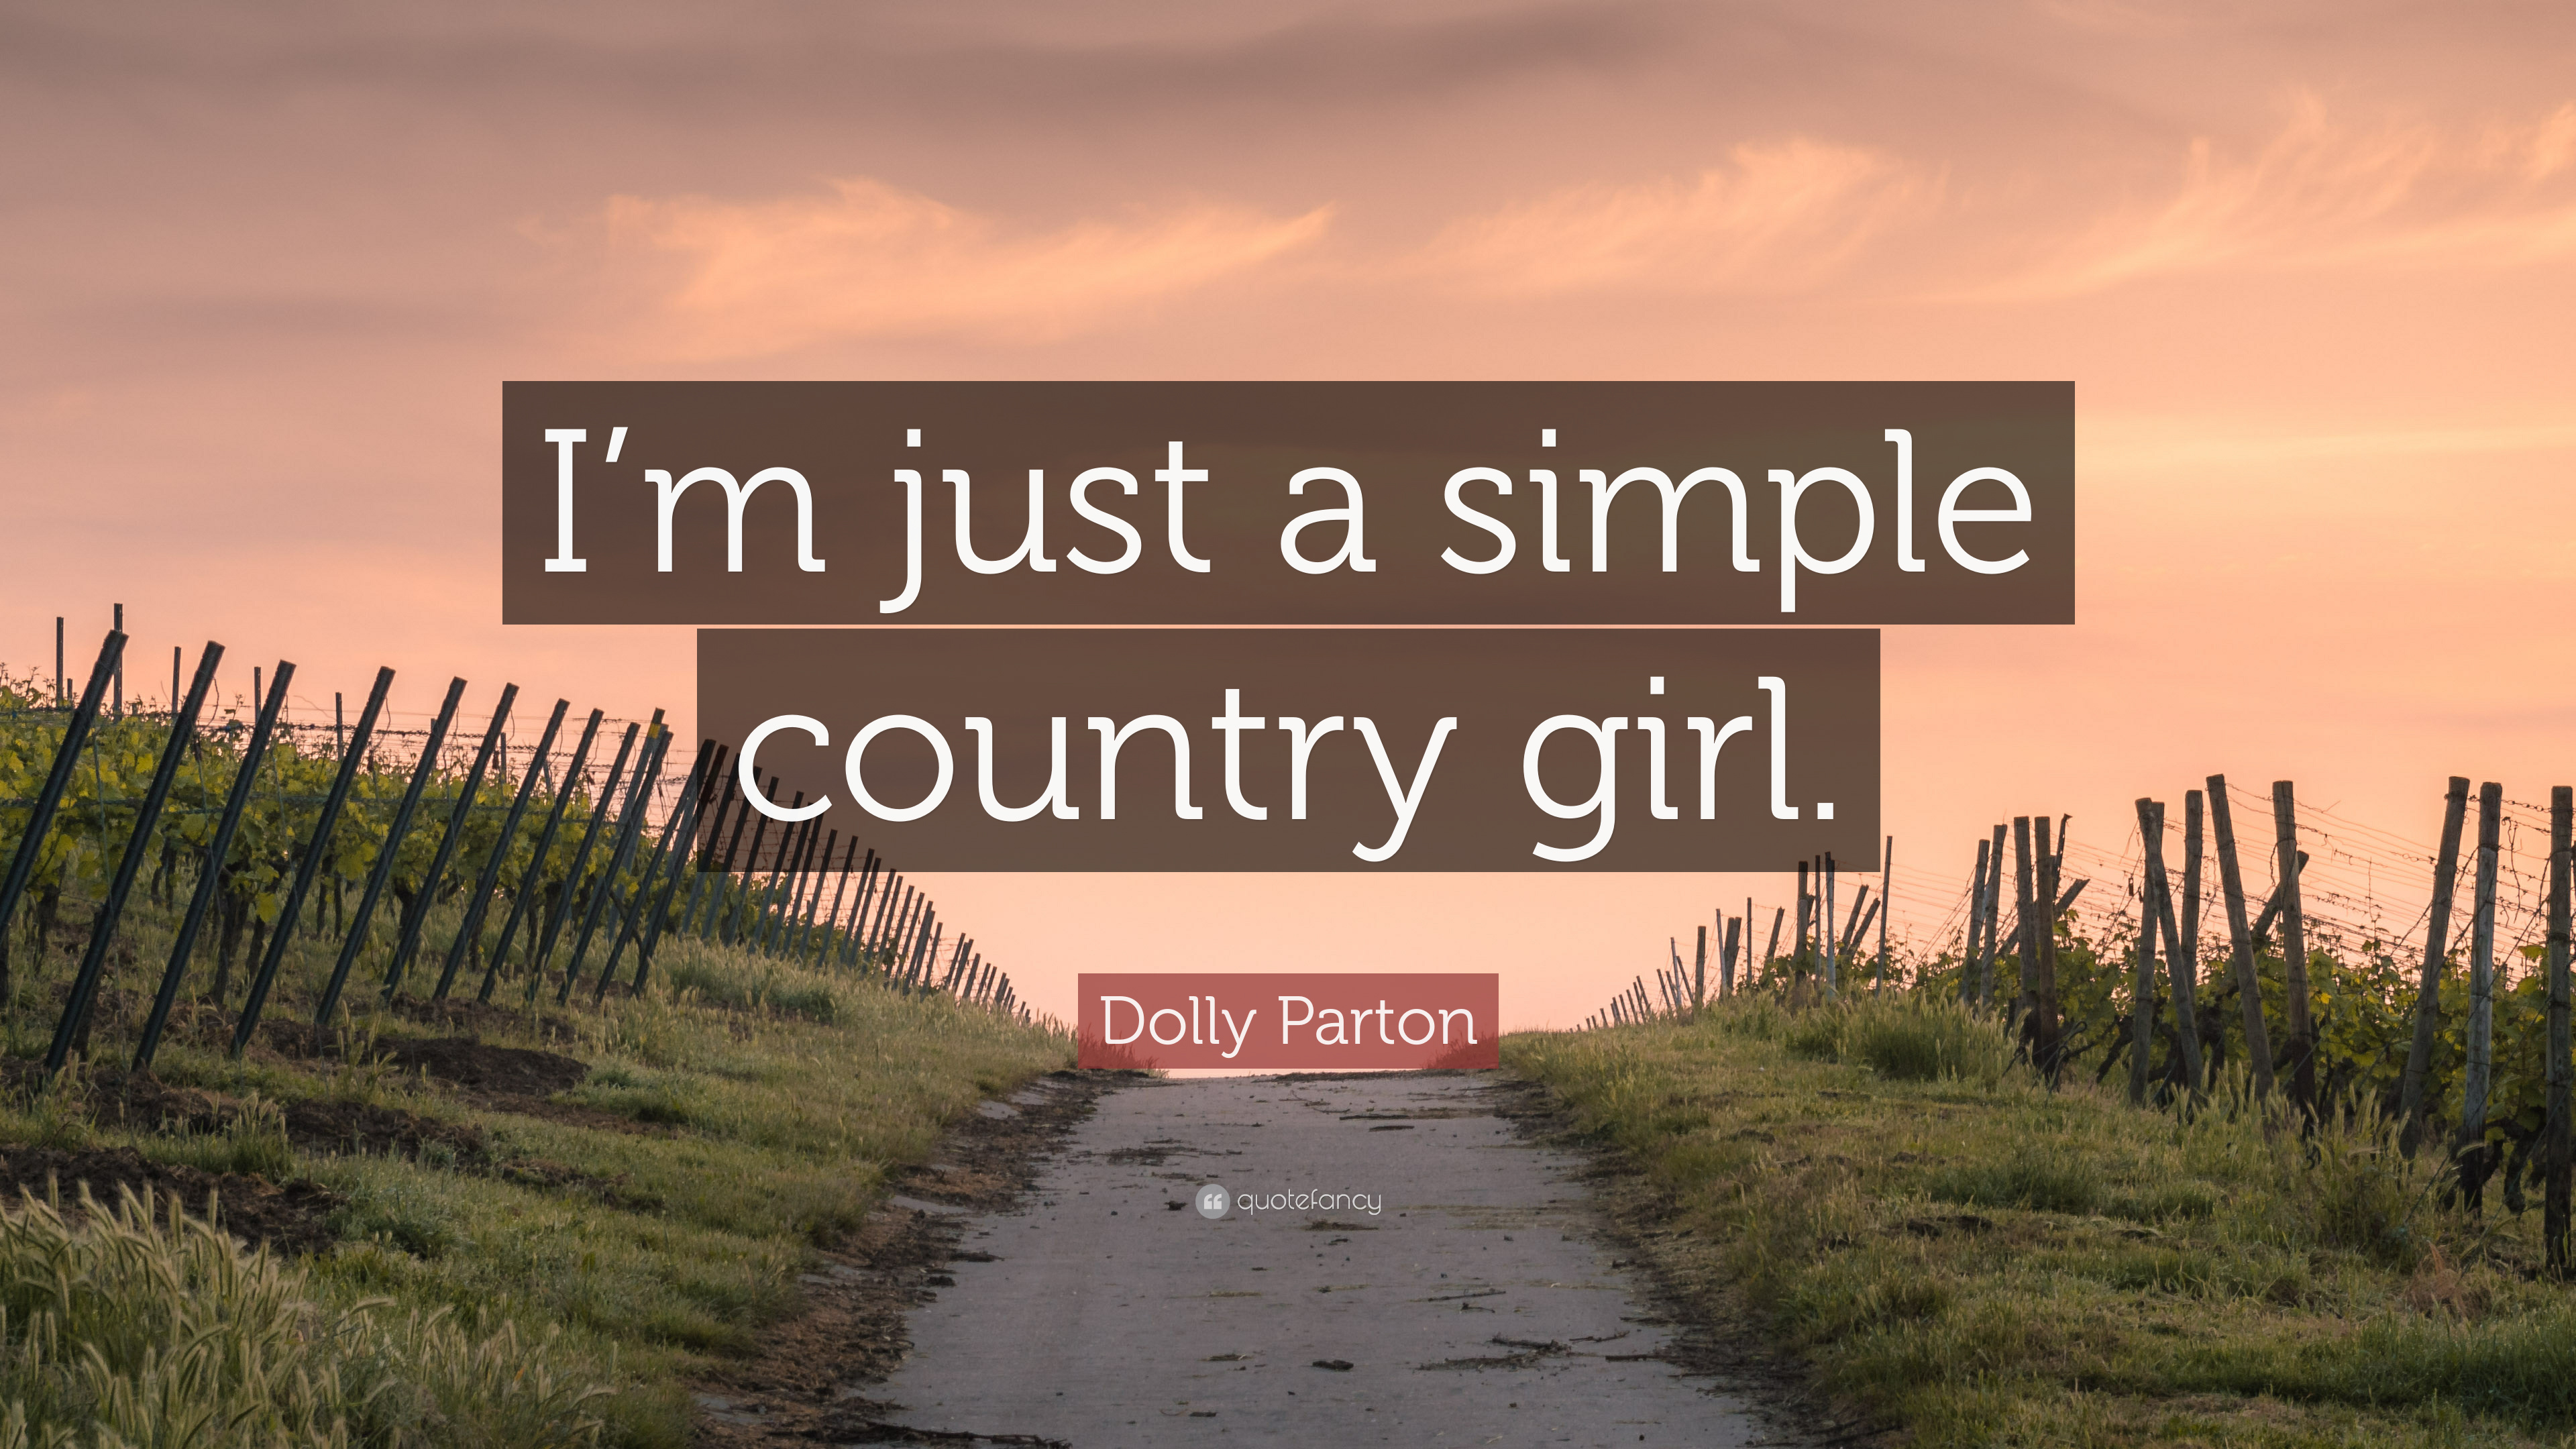 Dolly Parton Quote: “I'm just a simple country girl.” 12